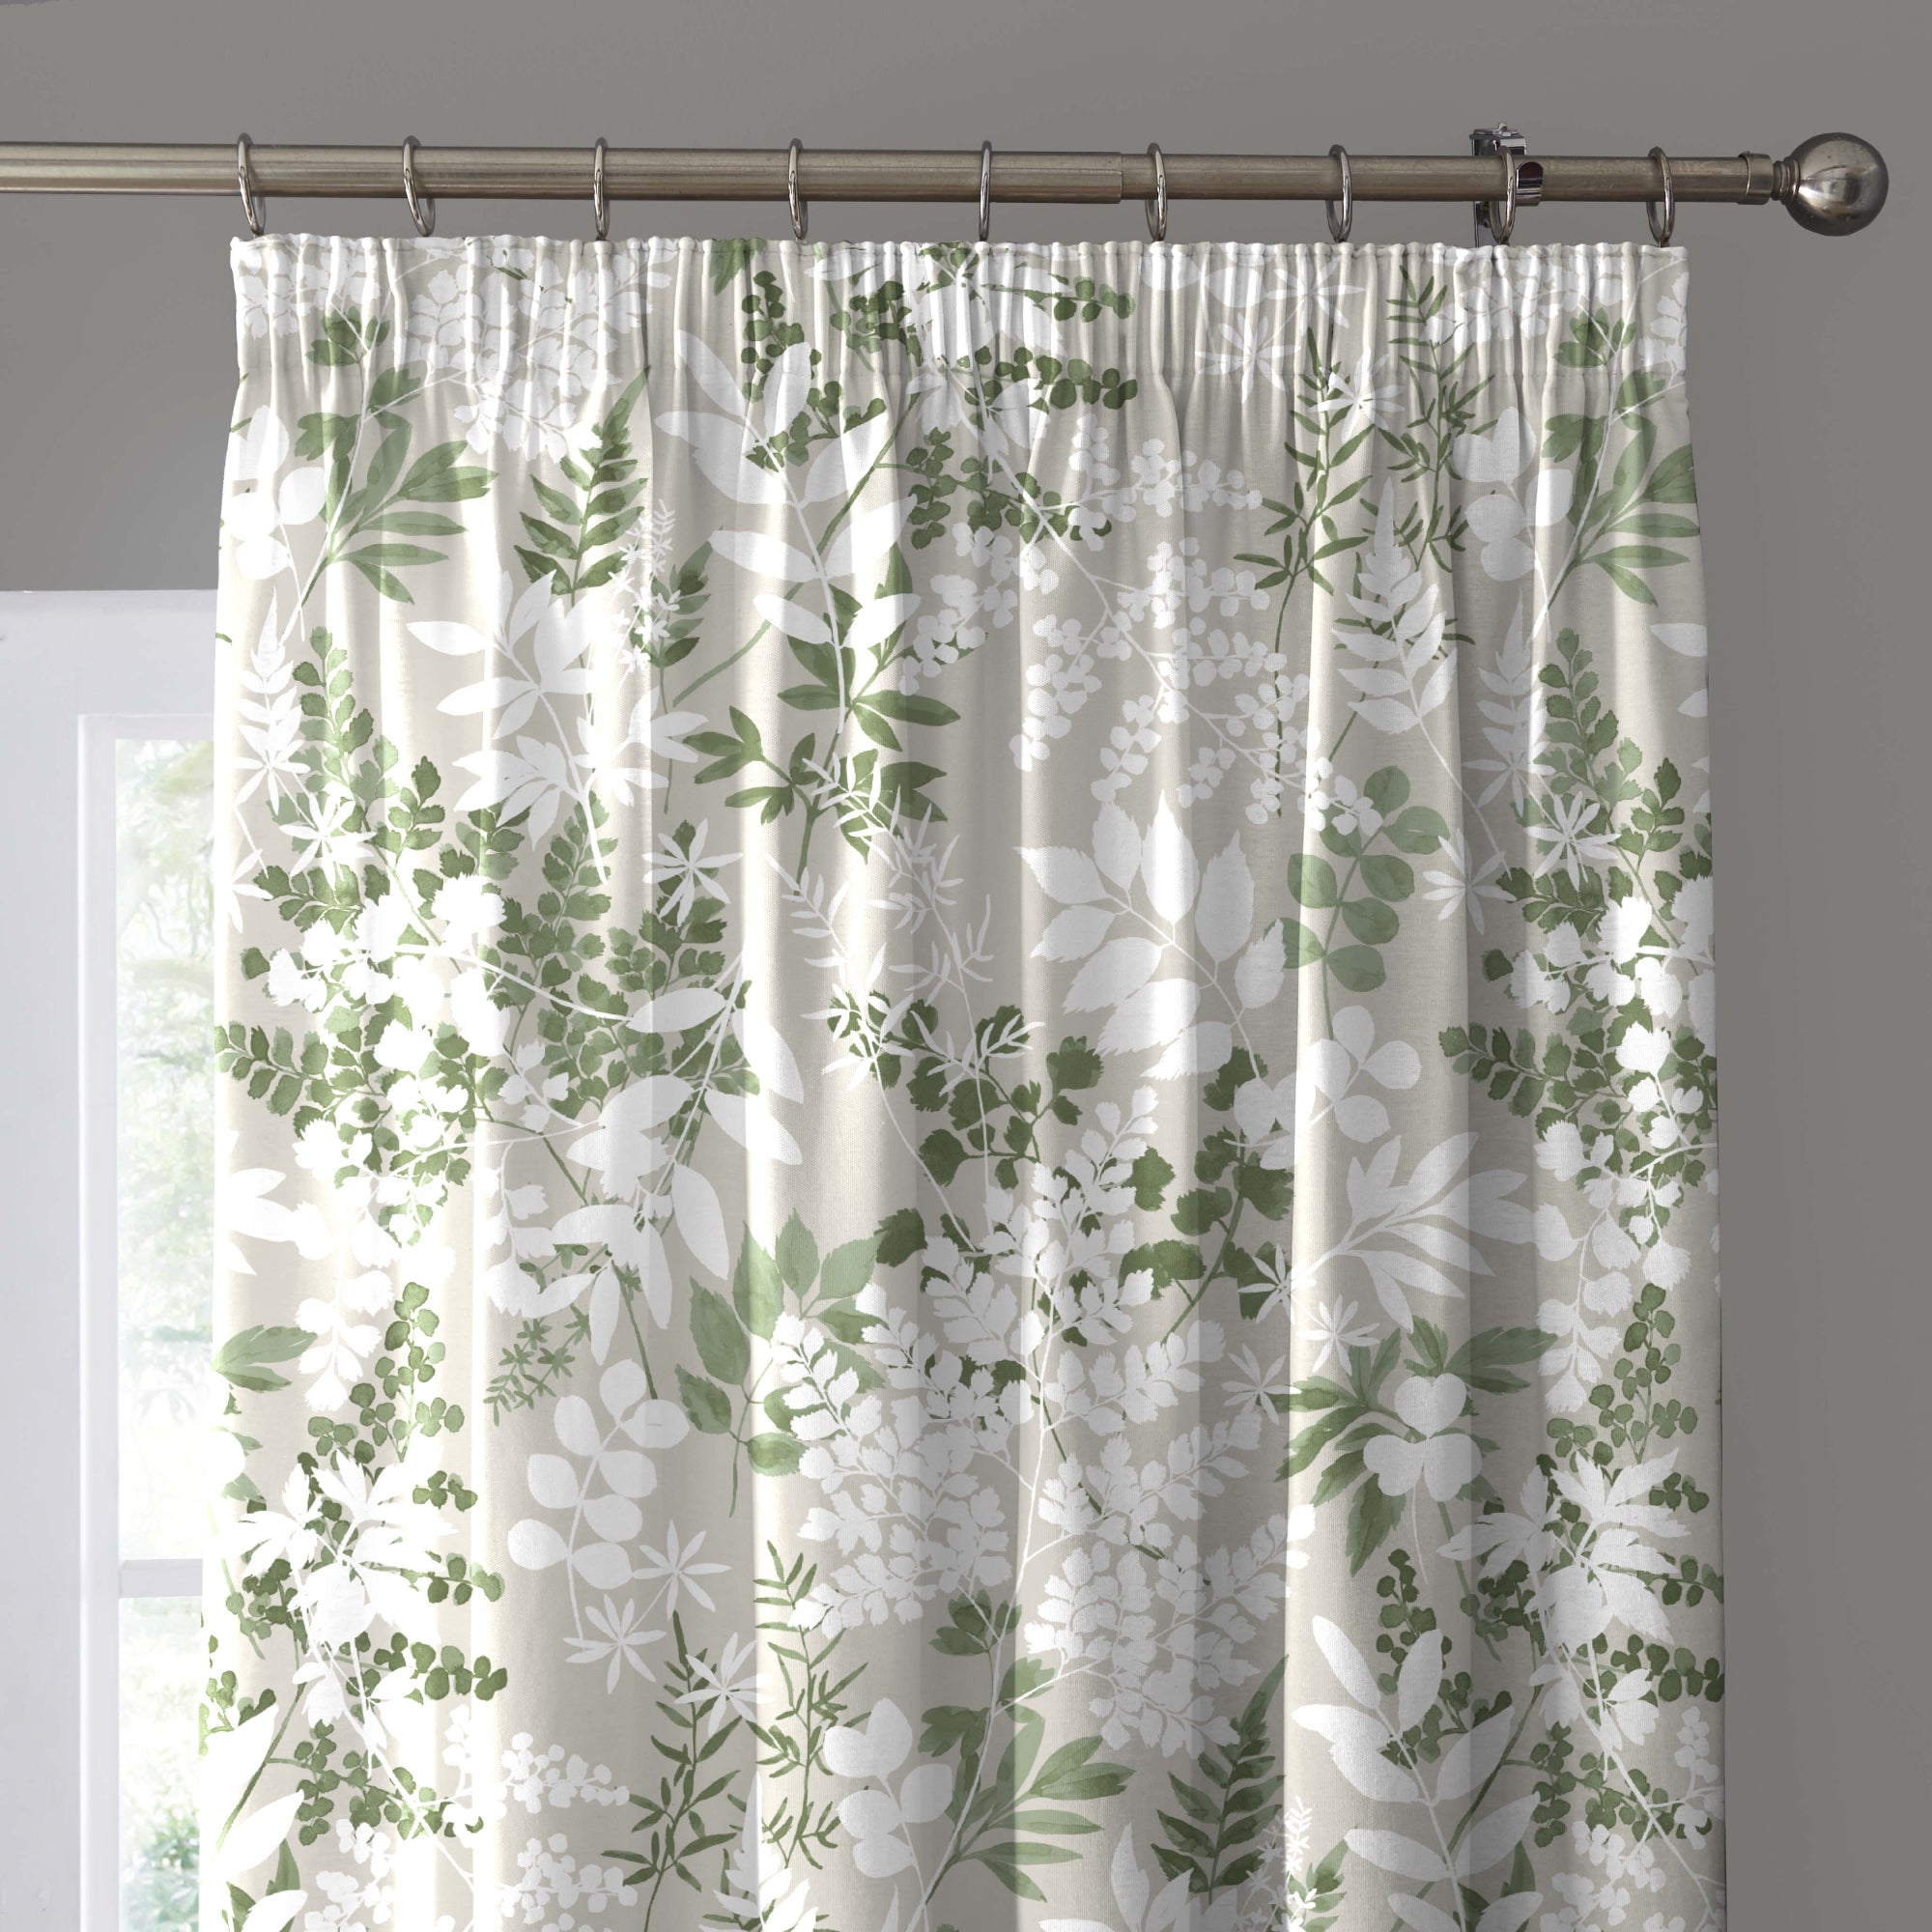 Voile Panel Tiverton by Dreams & Drapes Curtains in Green